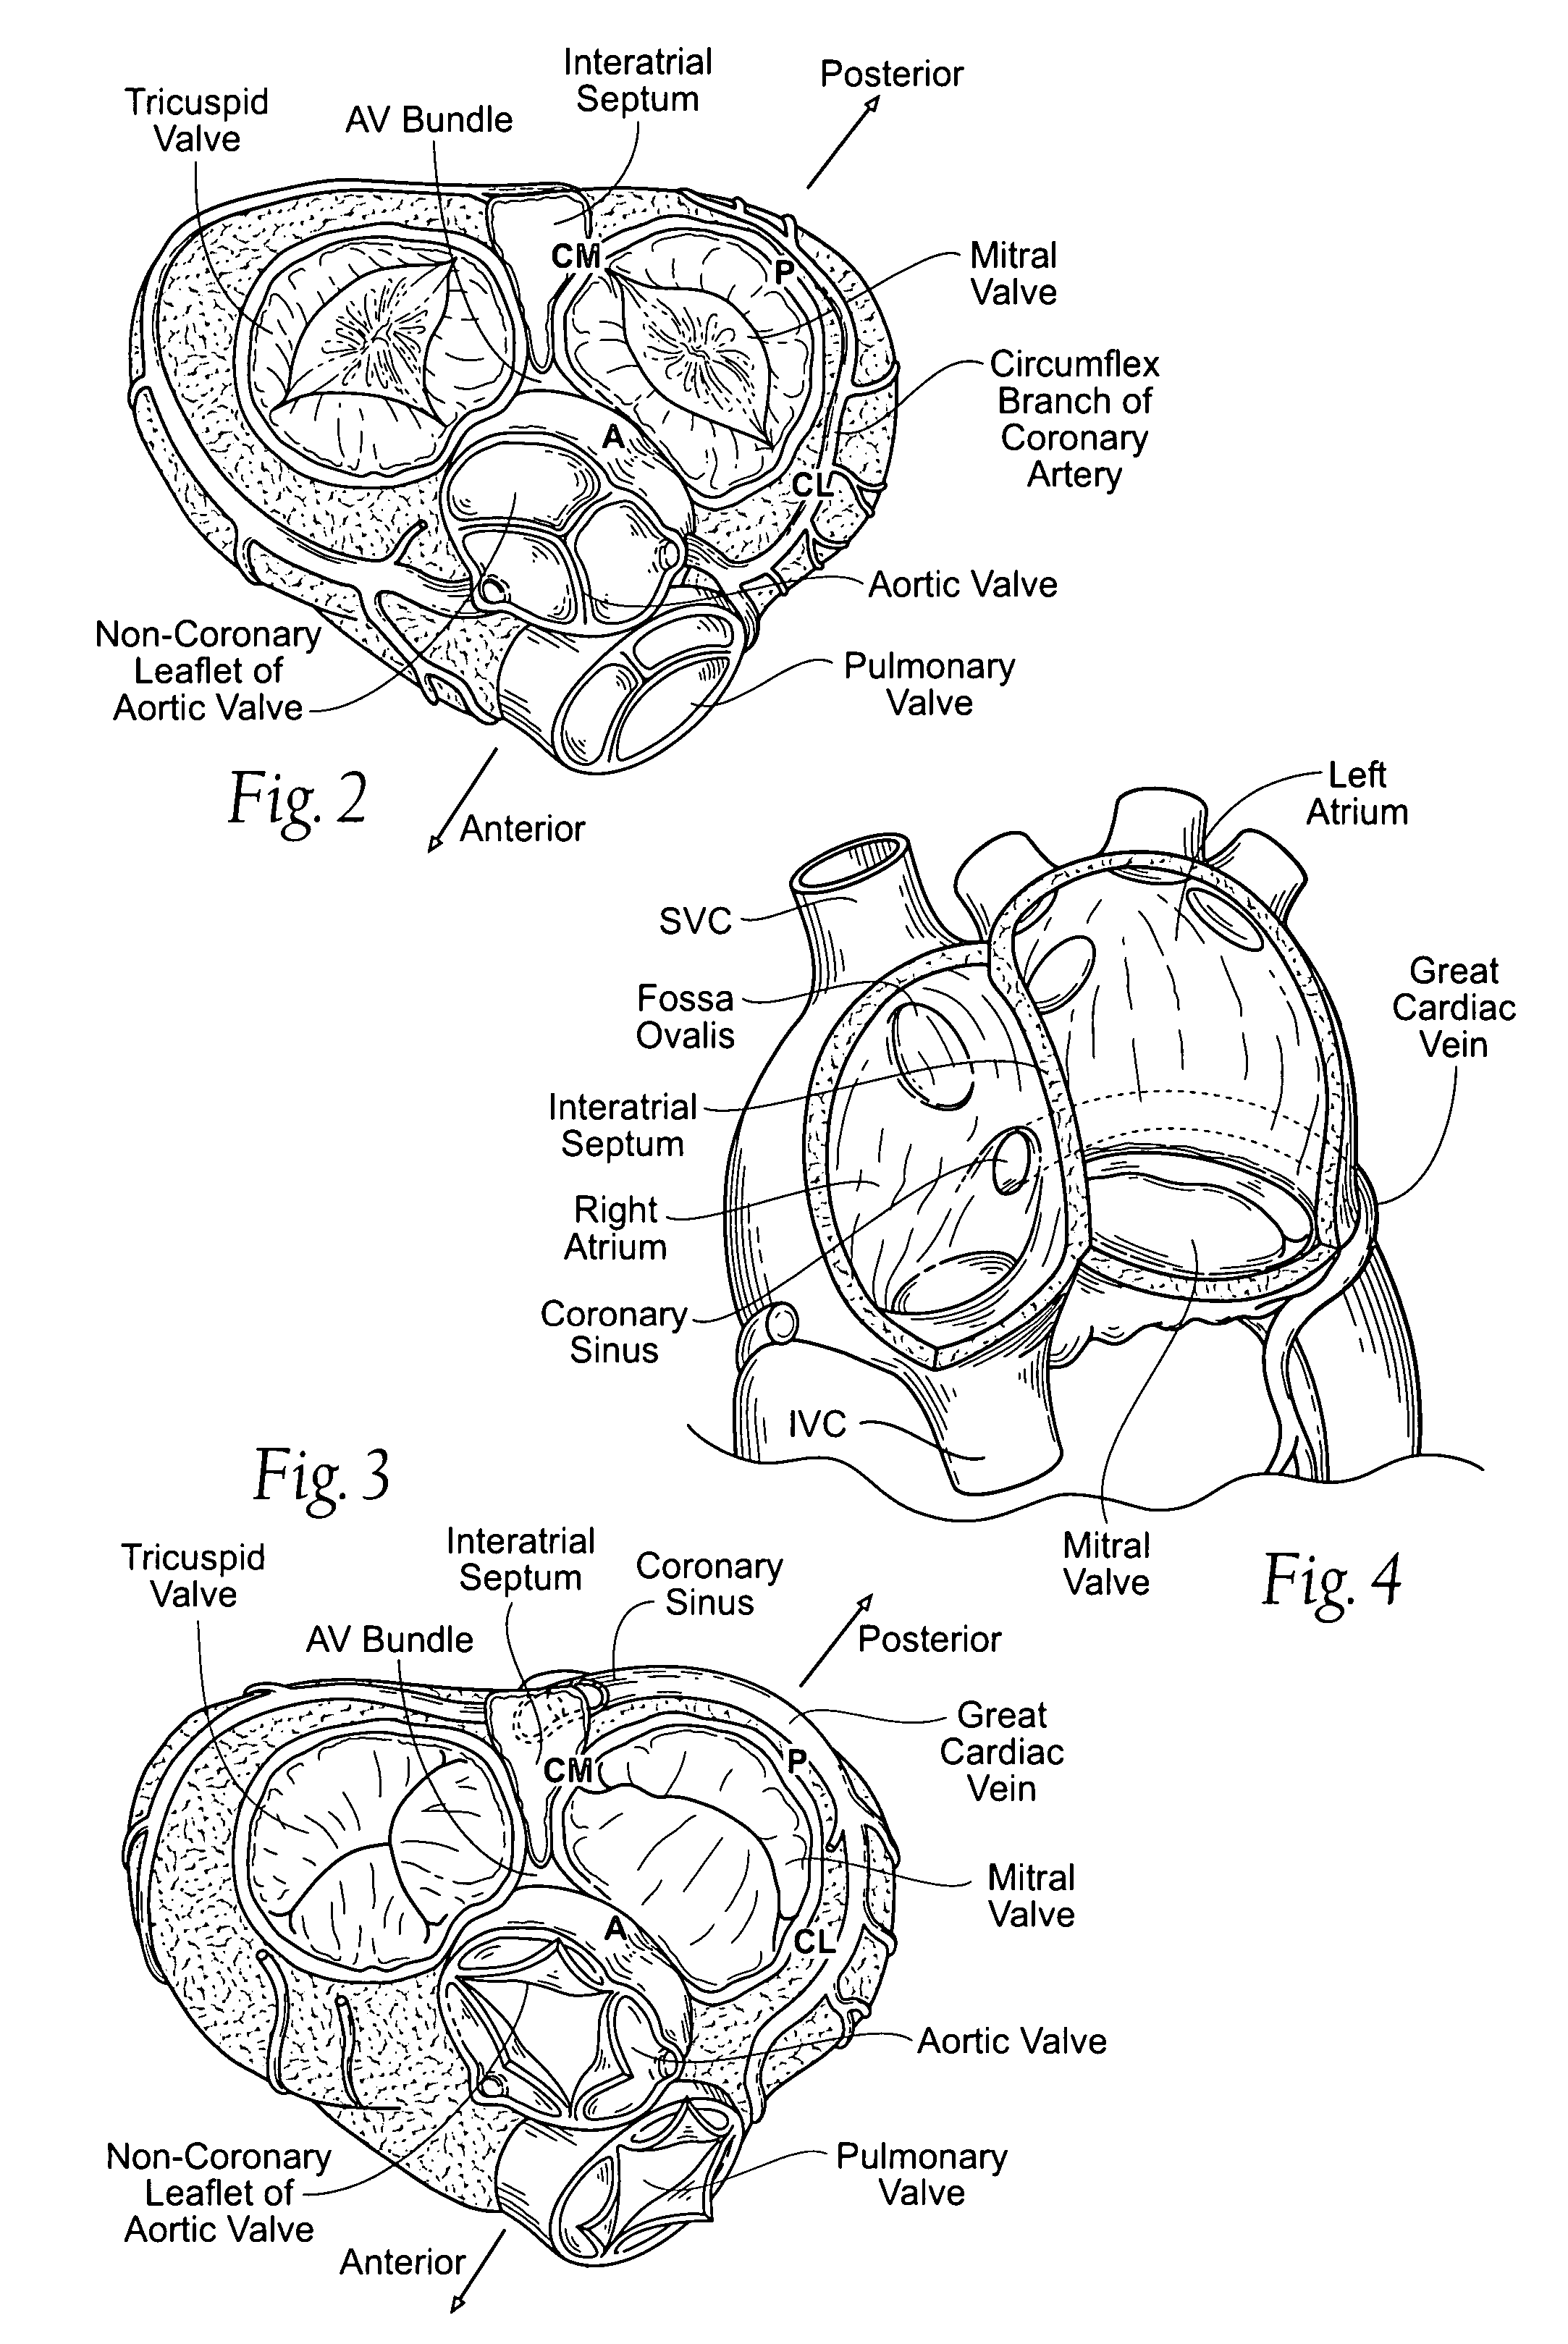 Devices, systems, and methods for reshaping a heart valve annulus, including the use of magnetic tools